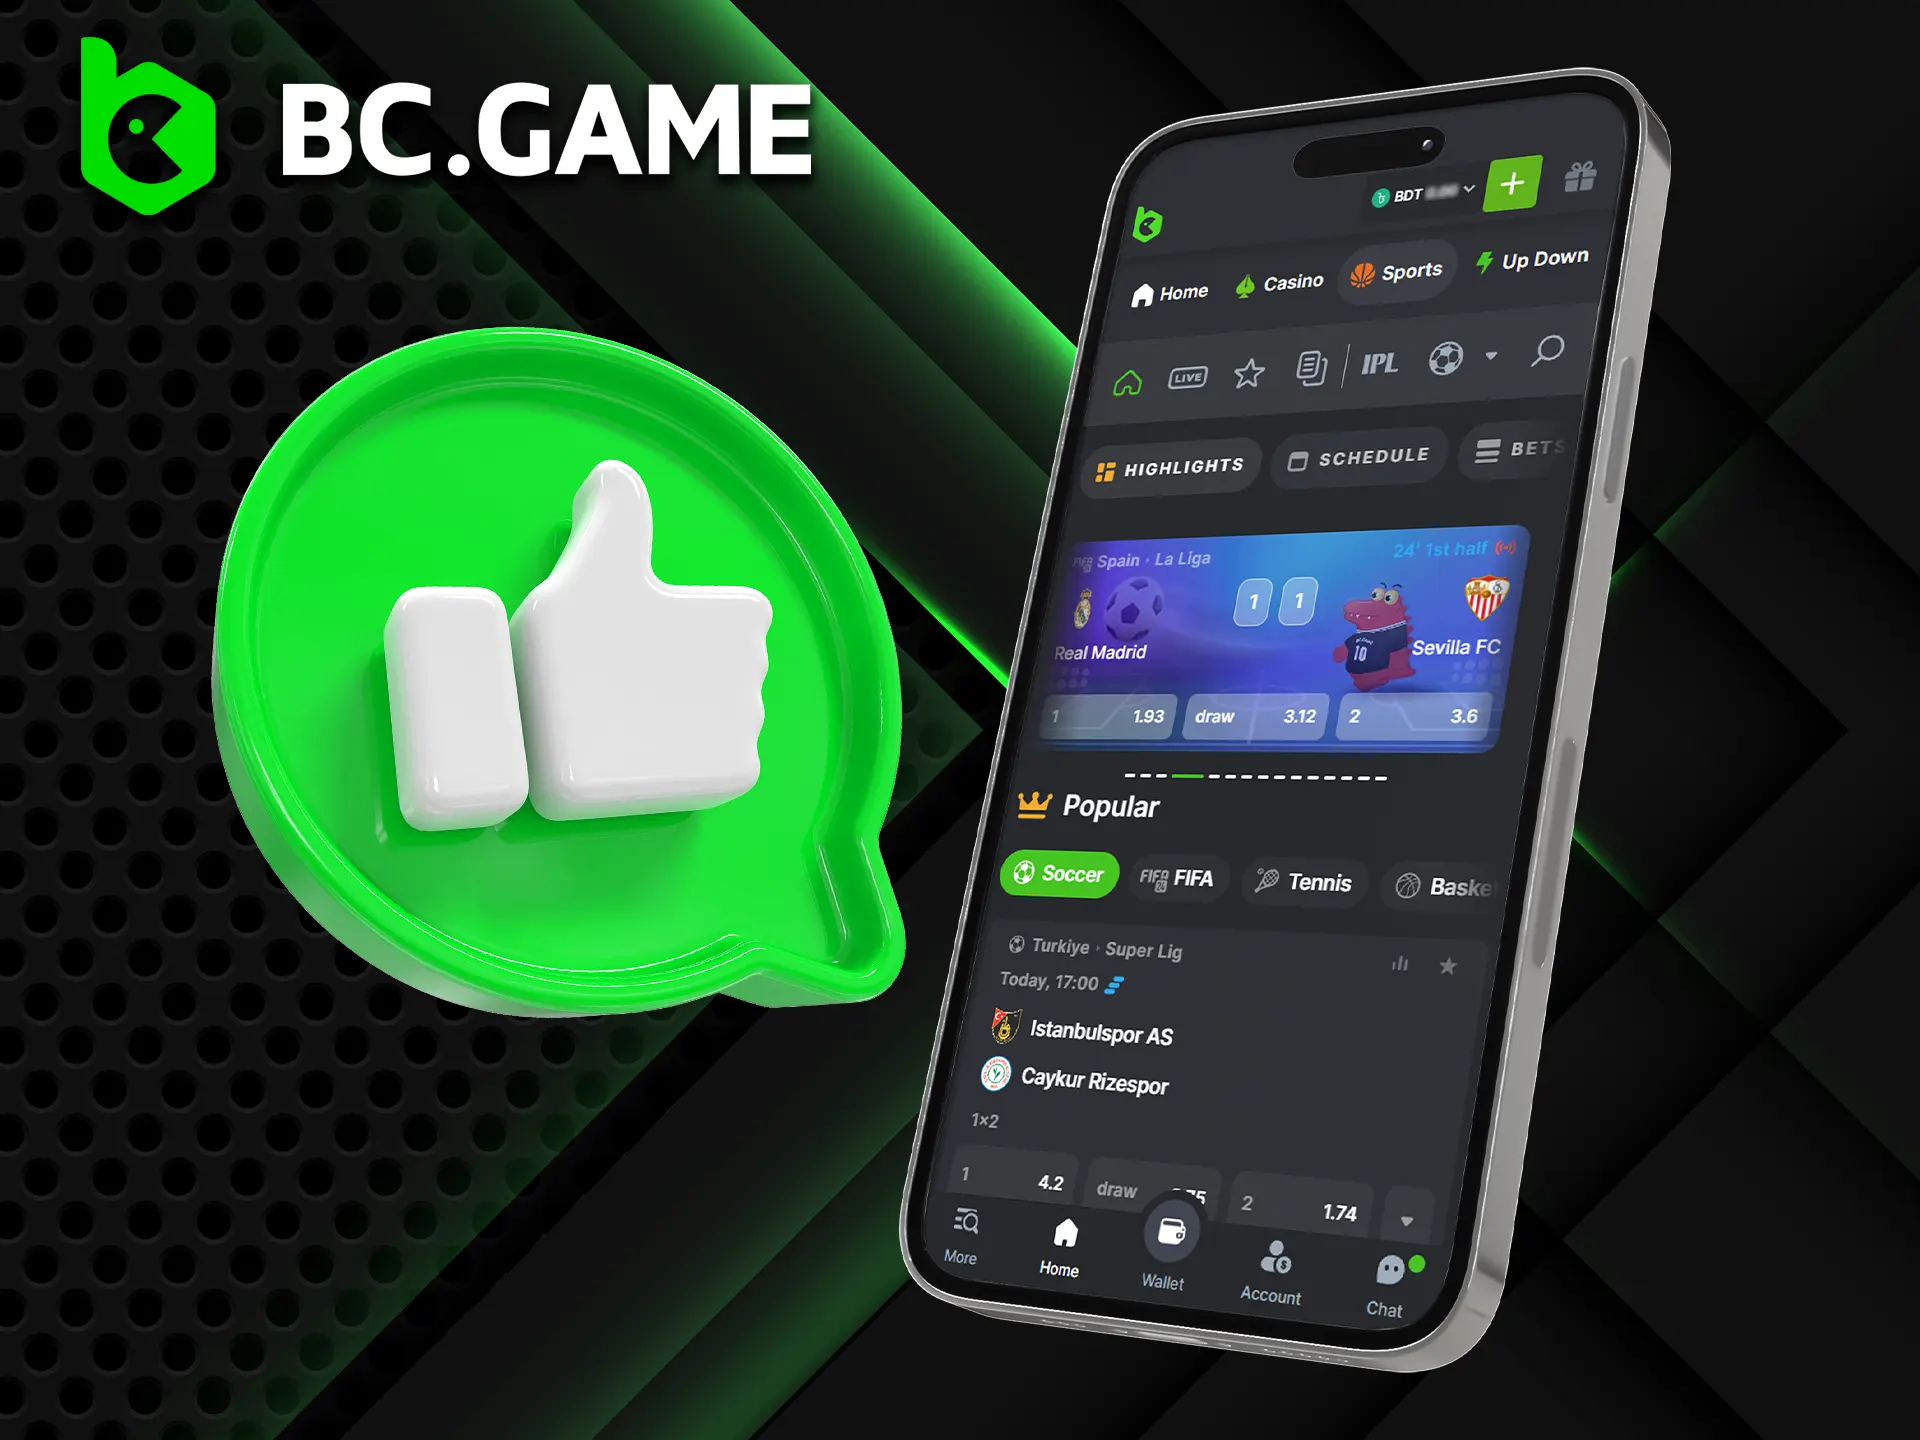 BC GAME casino offers mobile betting on a wide variety of sports.